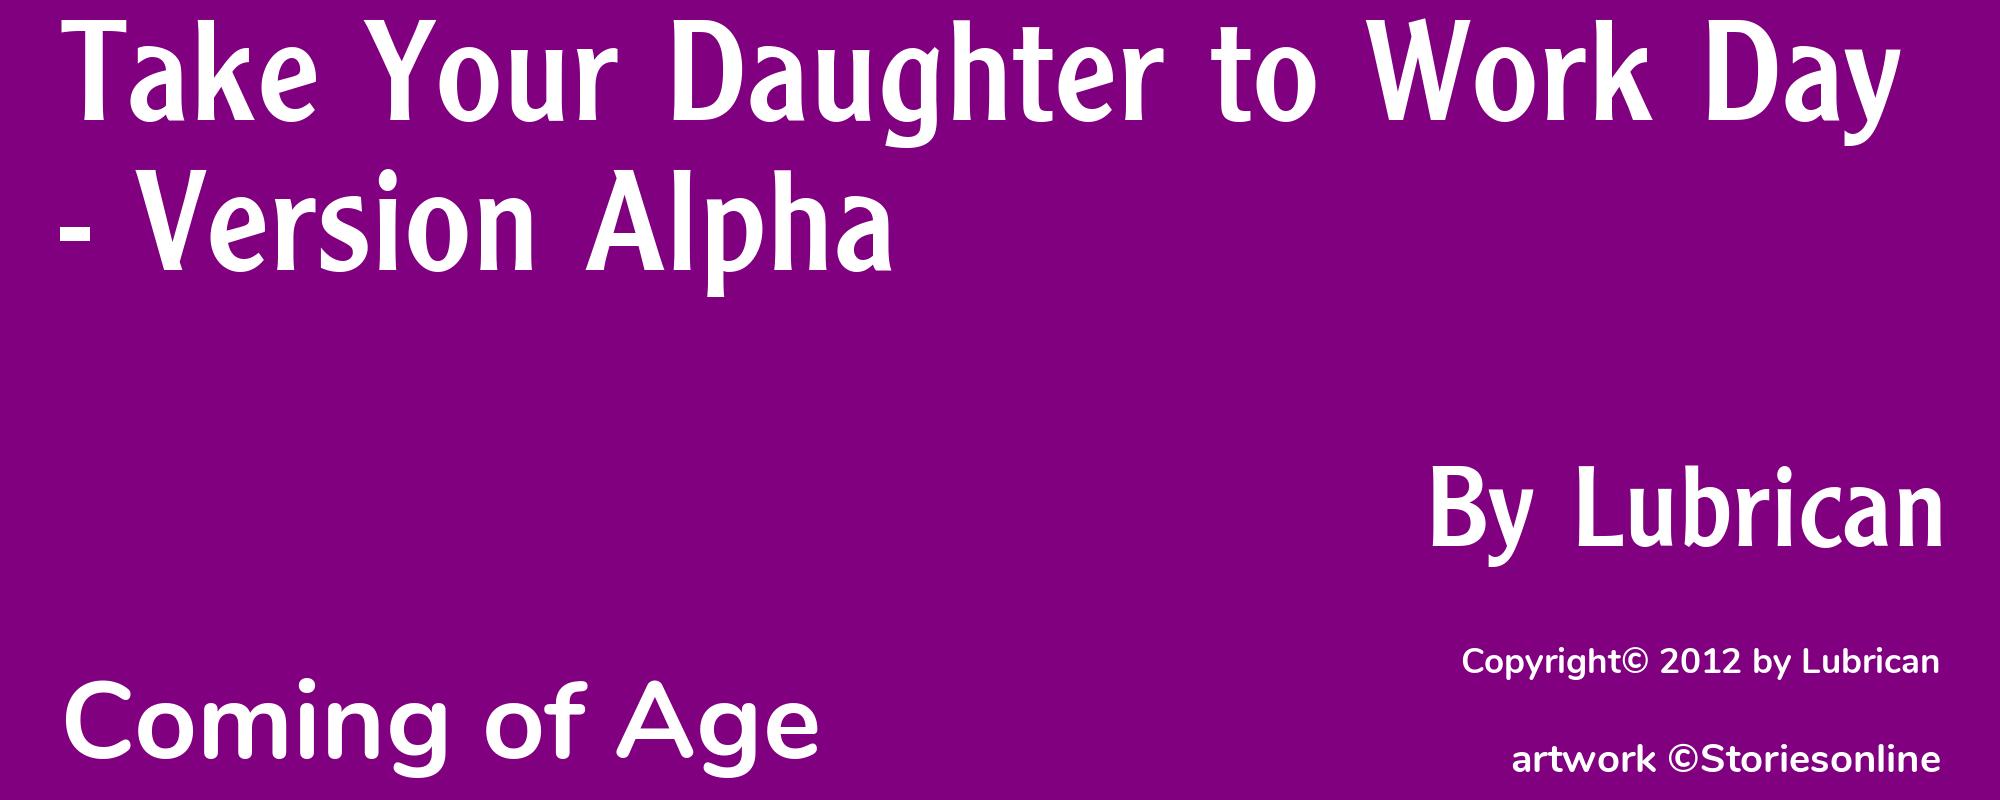 Take Your Daughter to Work Day - Version Alpha - Cover